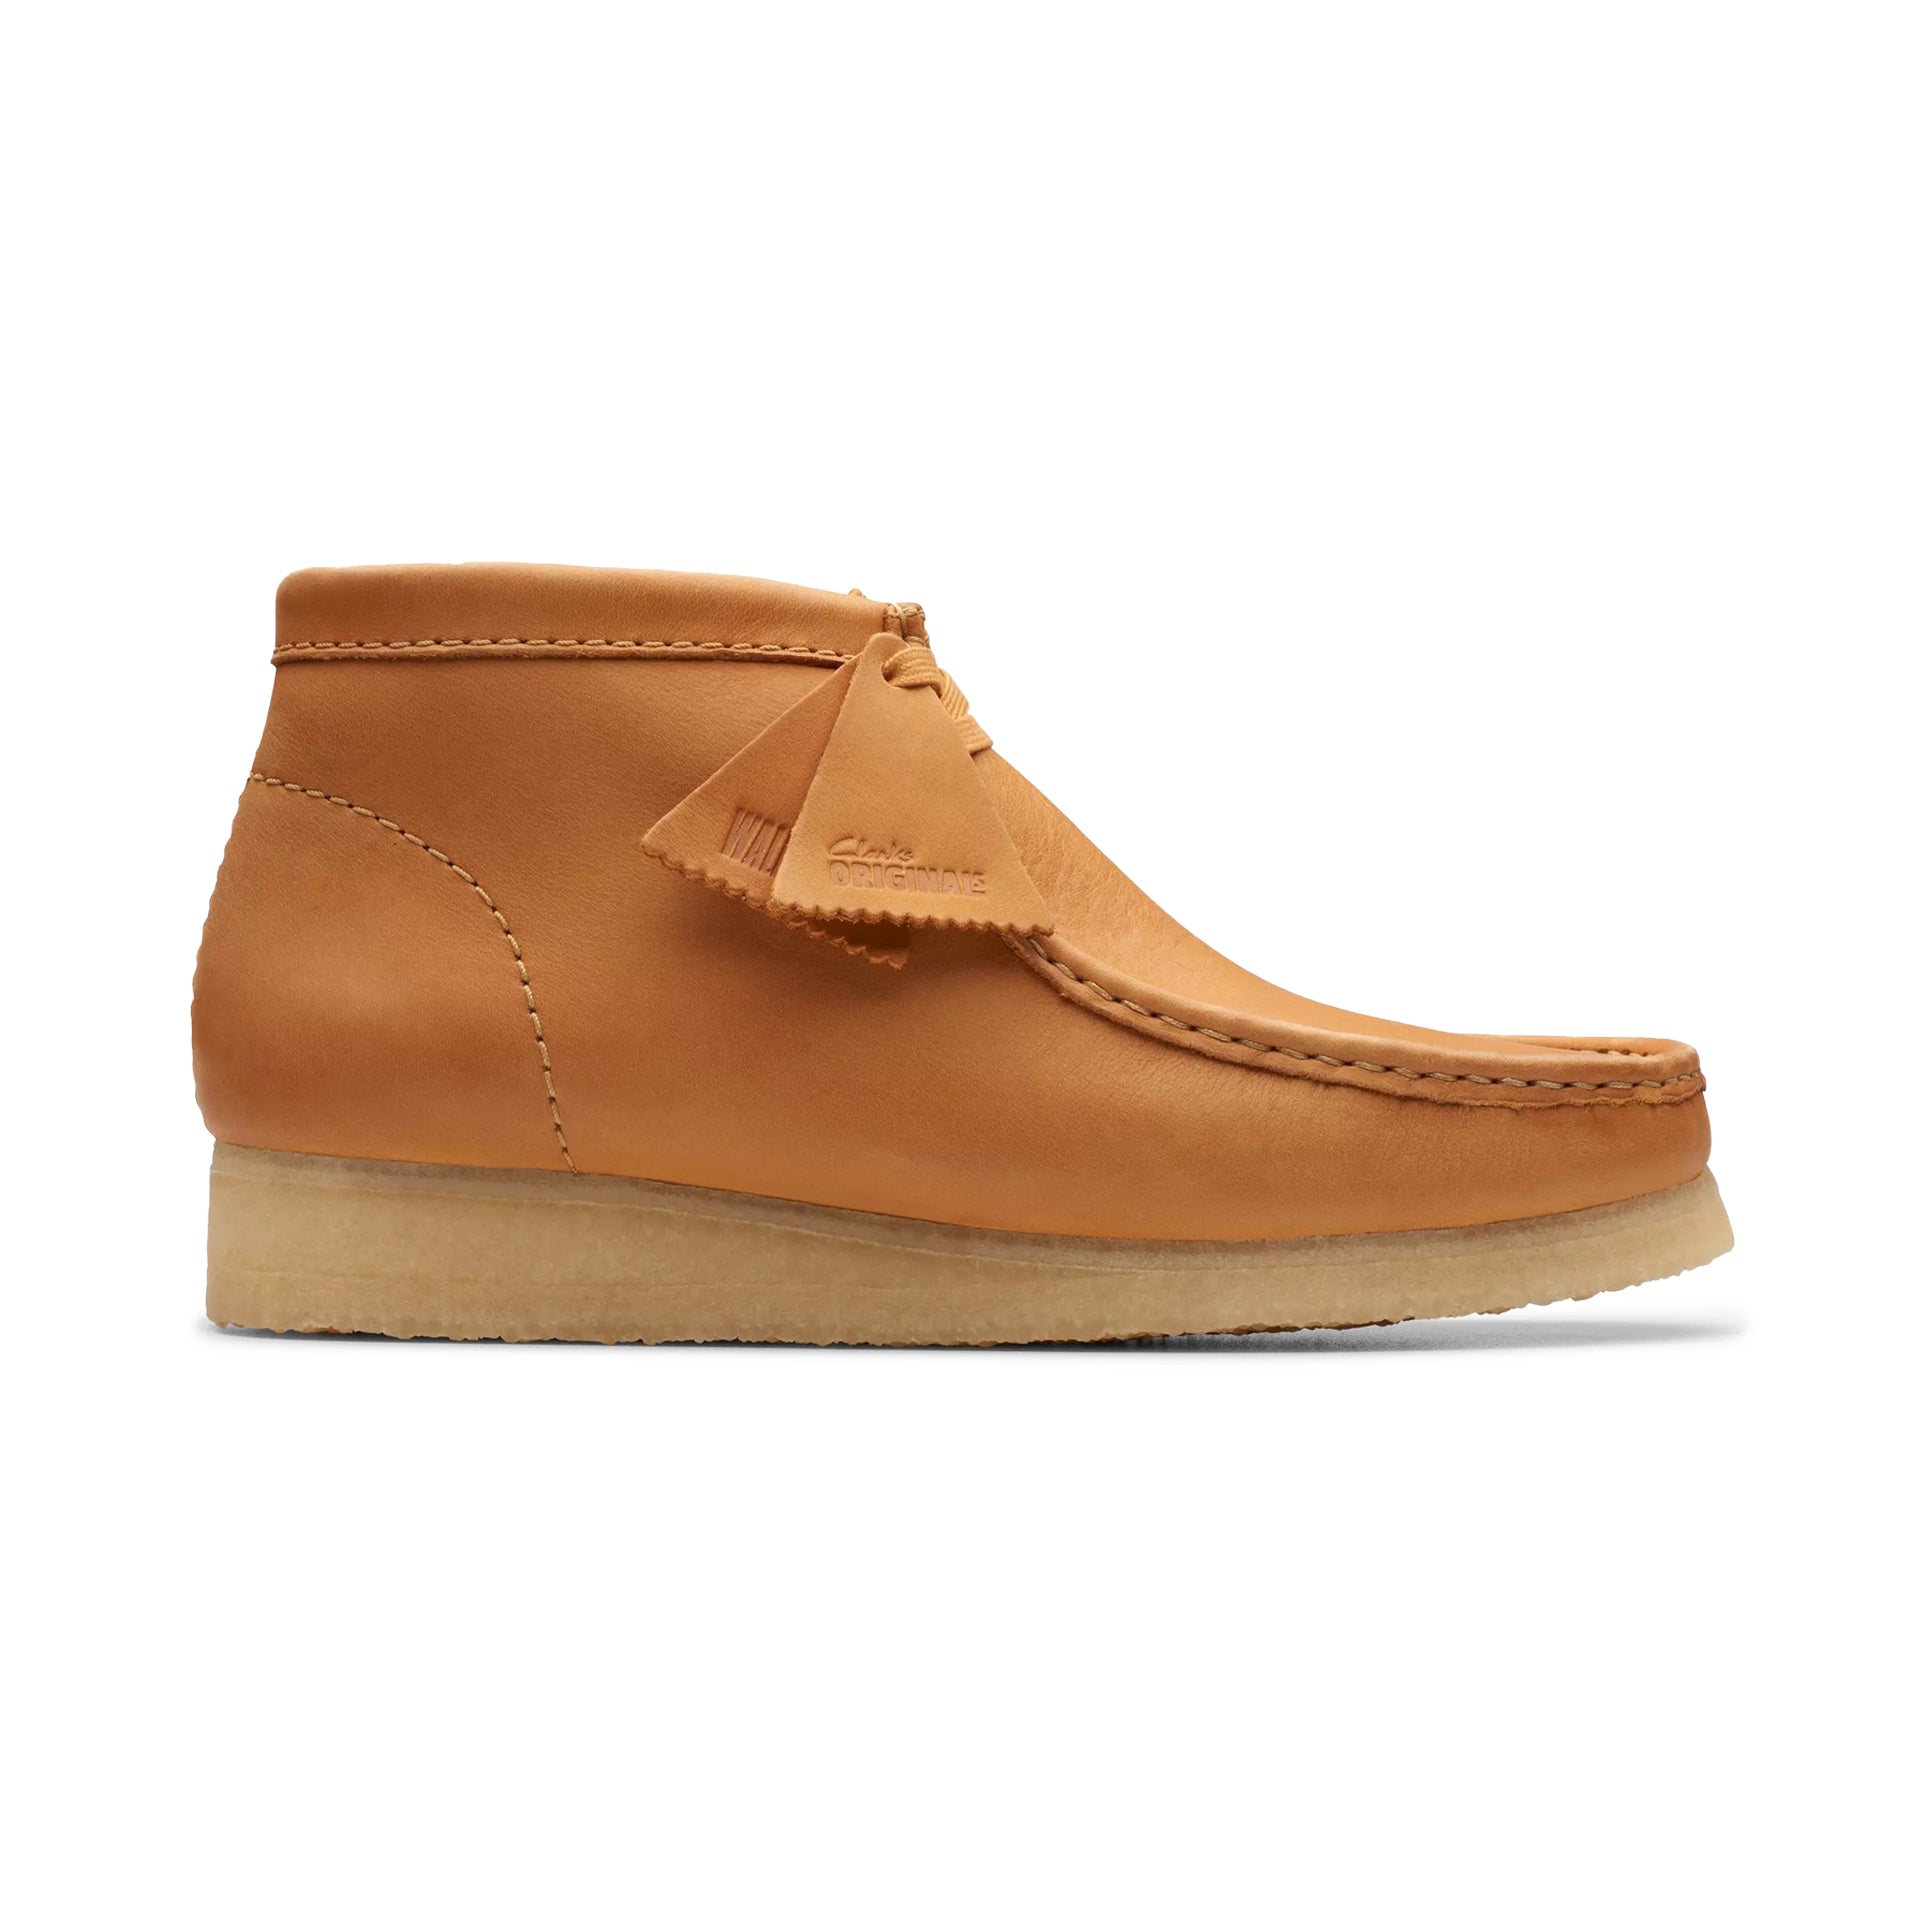 Clarks Wallabee Boots | Uncrate Supply